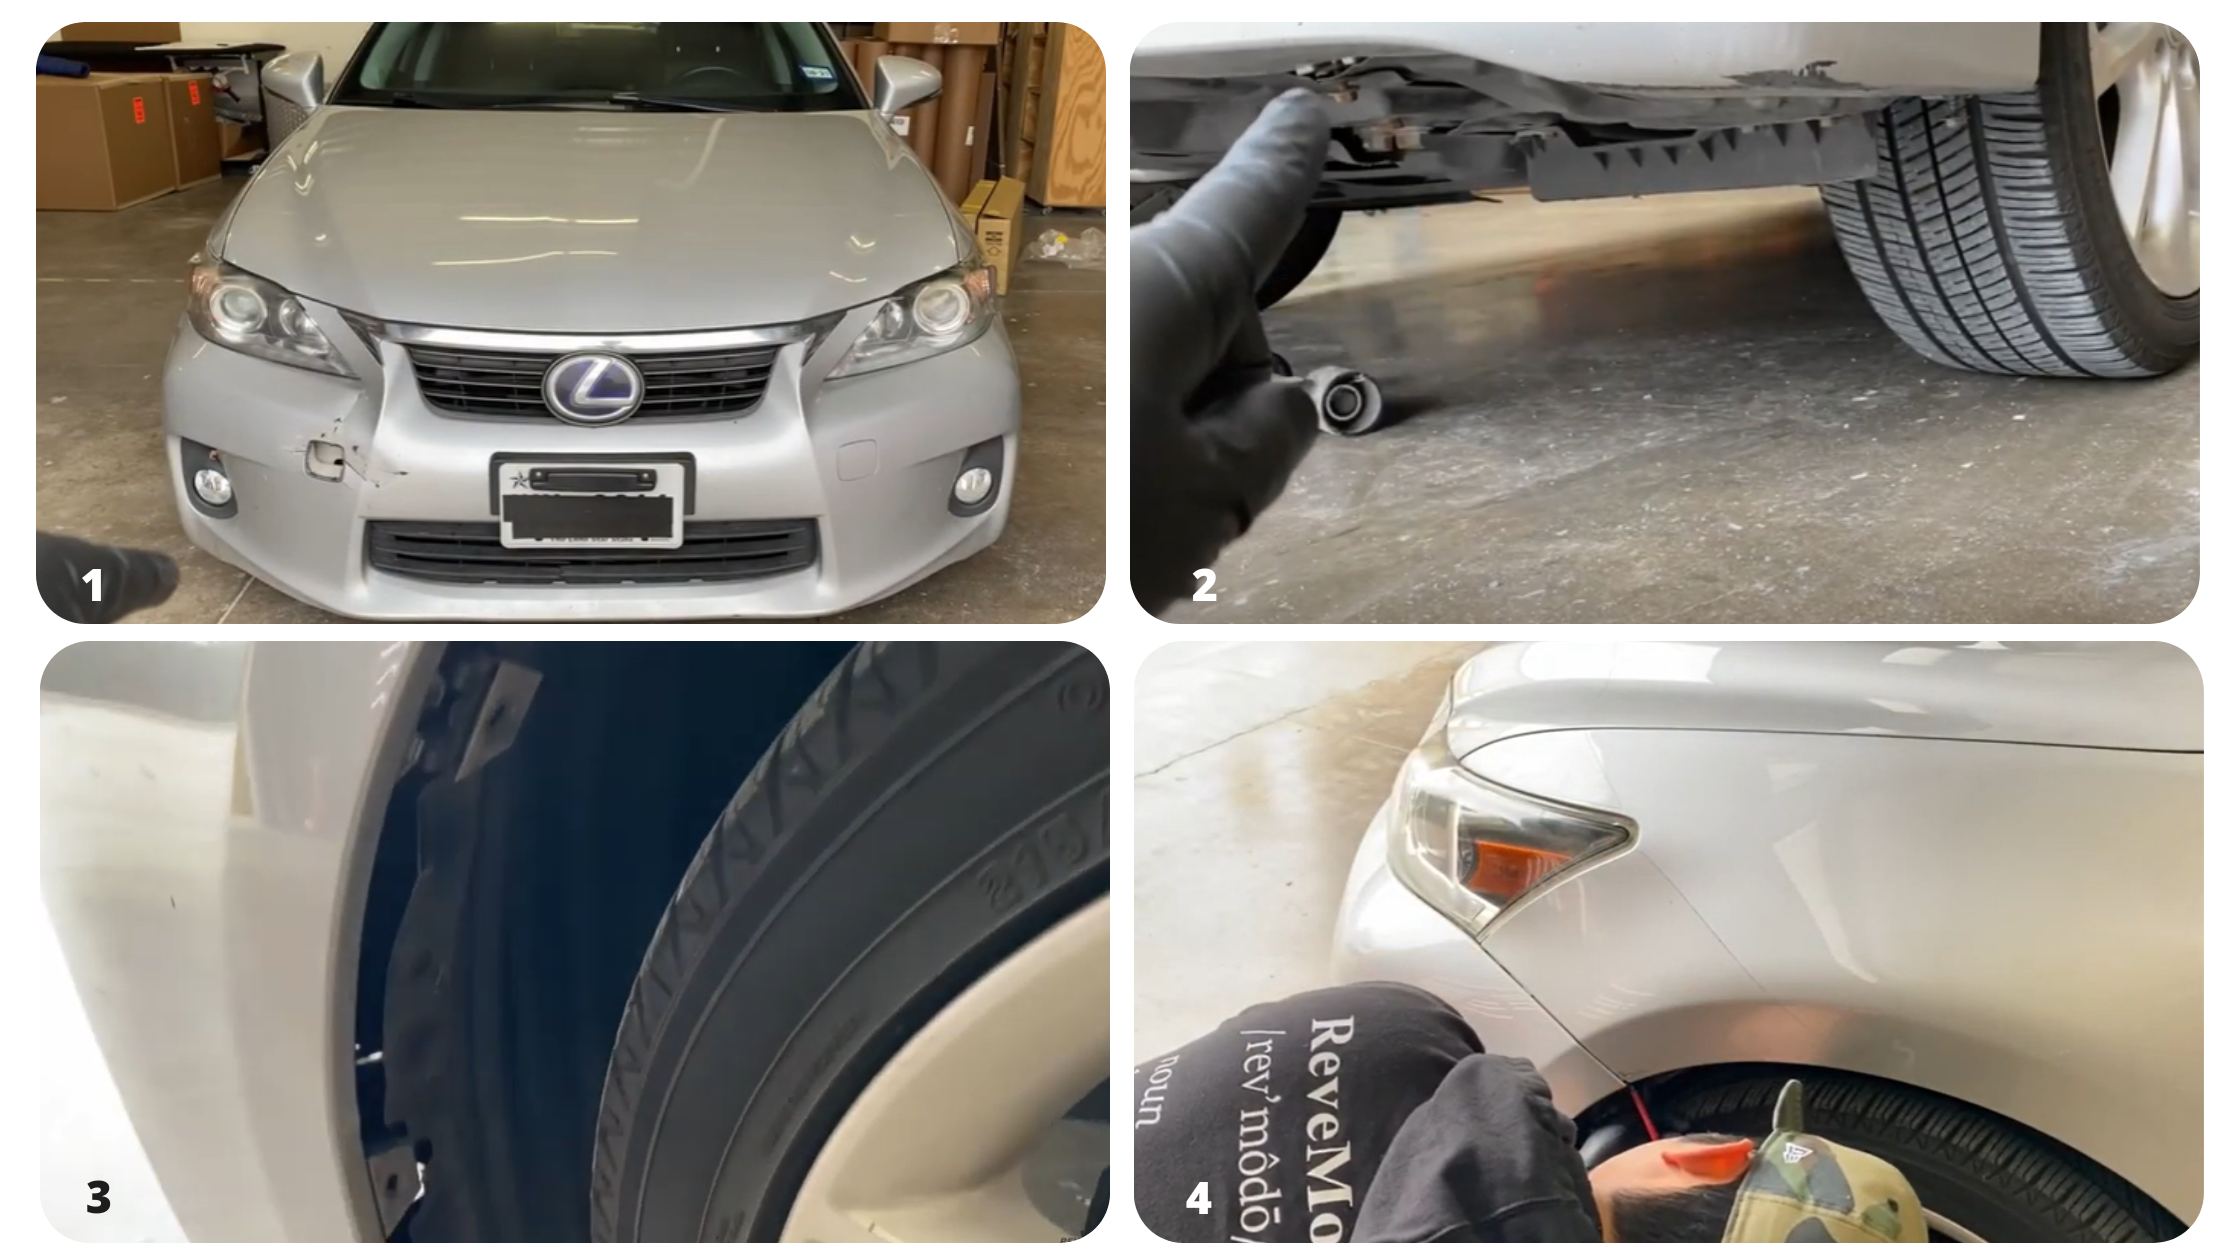 Vehicle conversion of Lexus CT200H Base Model to F-Sport steps 1-4